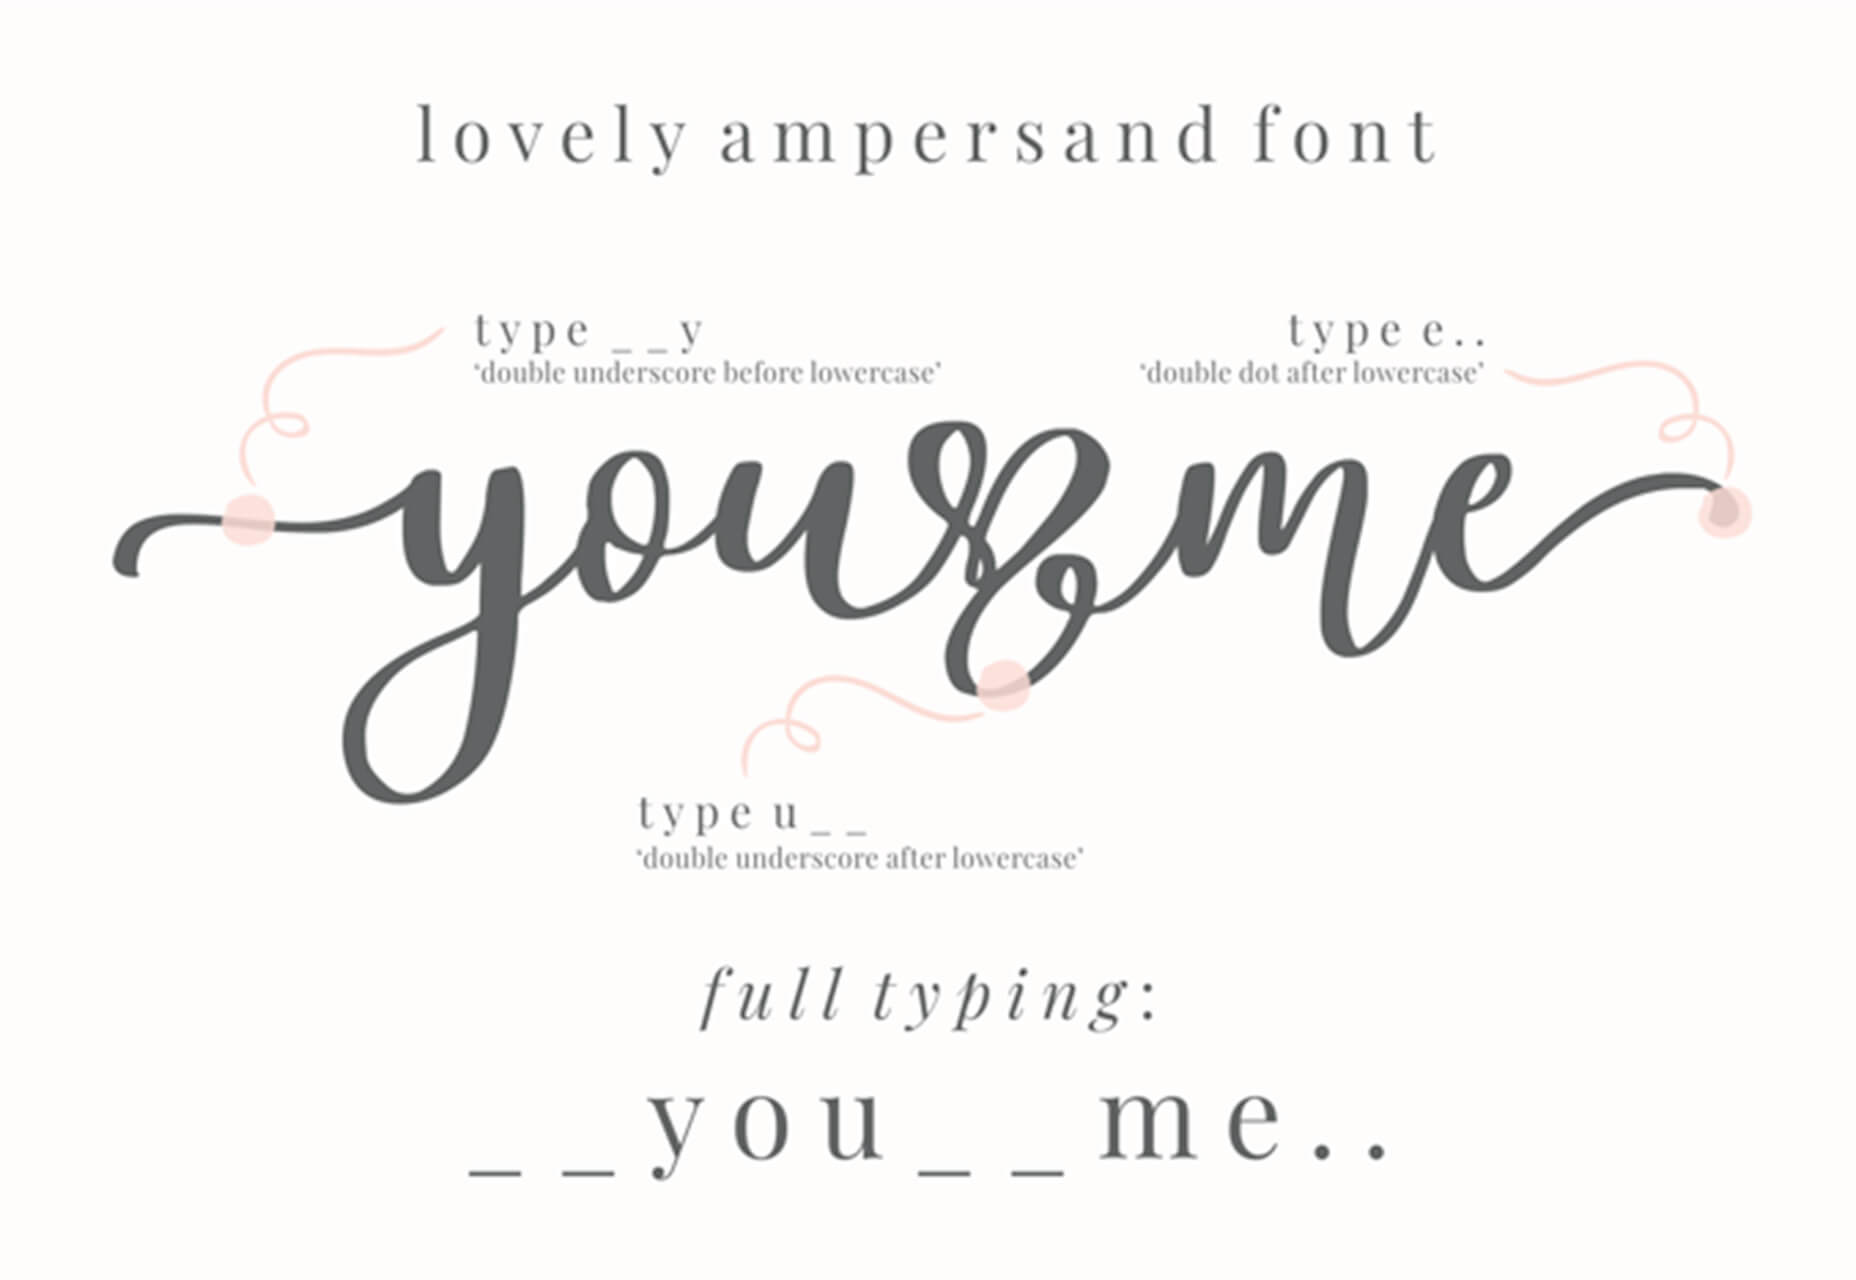 loveampersand